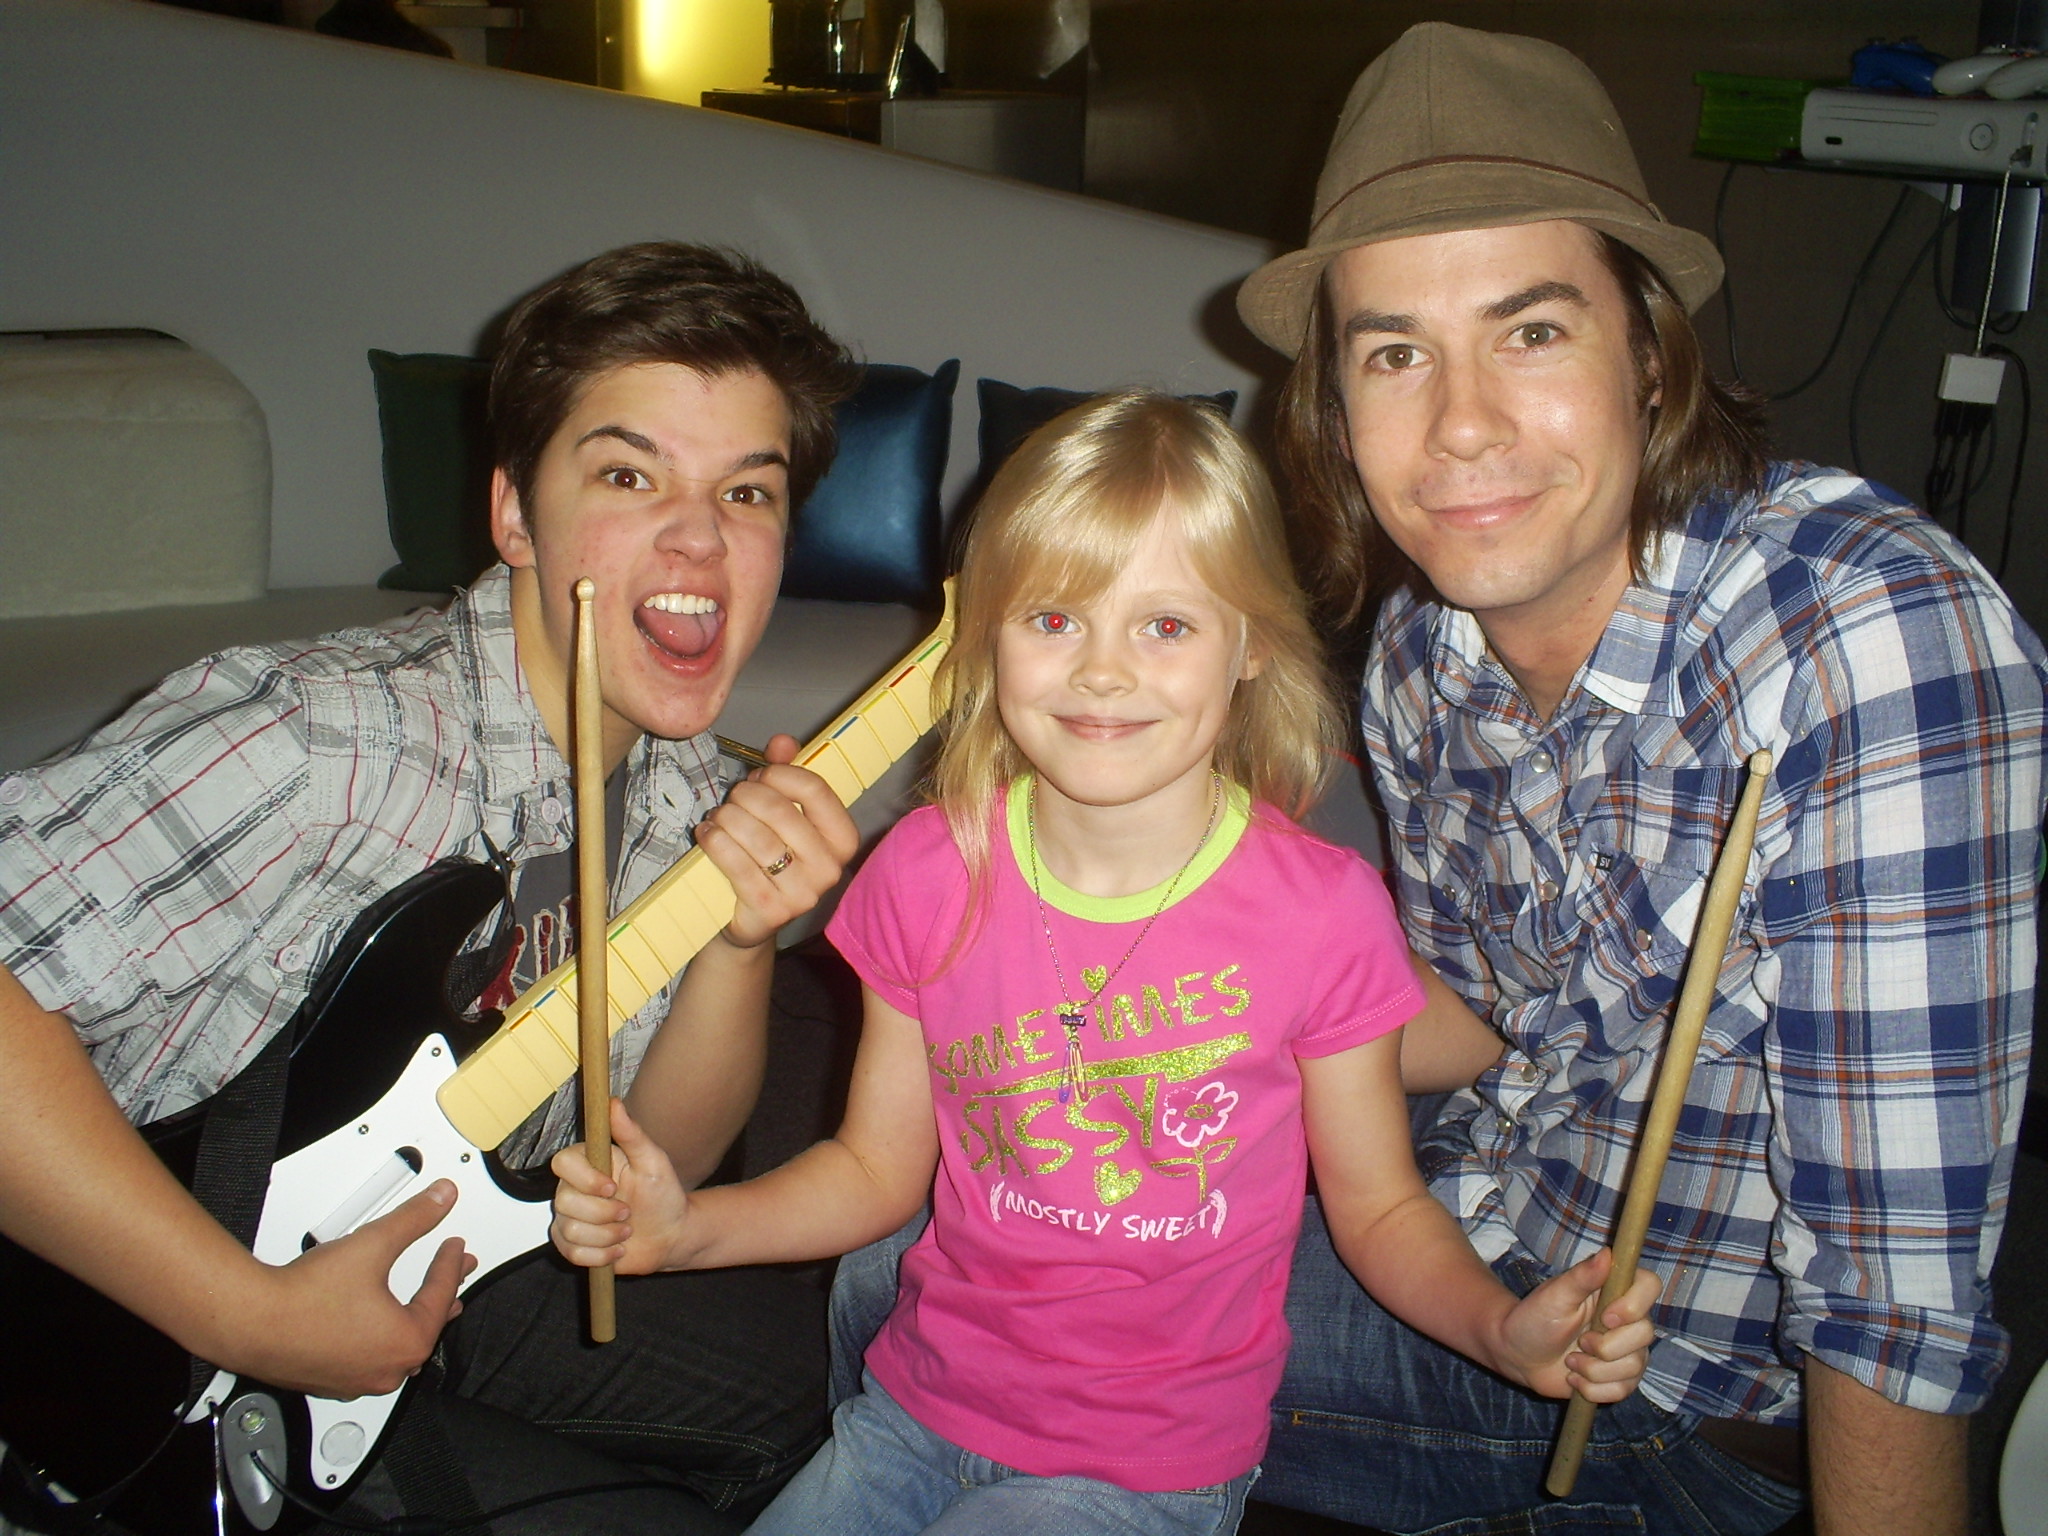 Harley with Nathan Kress and Jerry Trainor on the iCarly set.